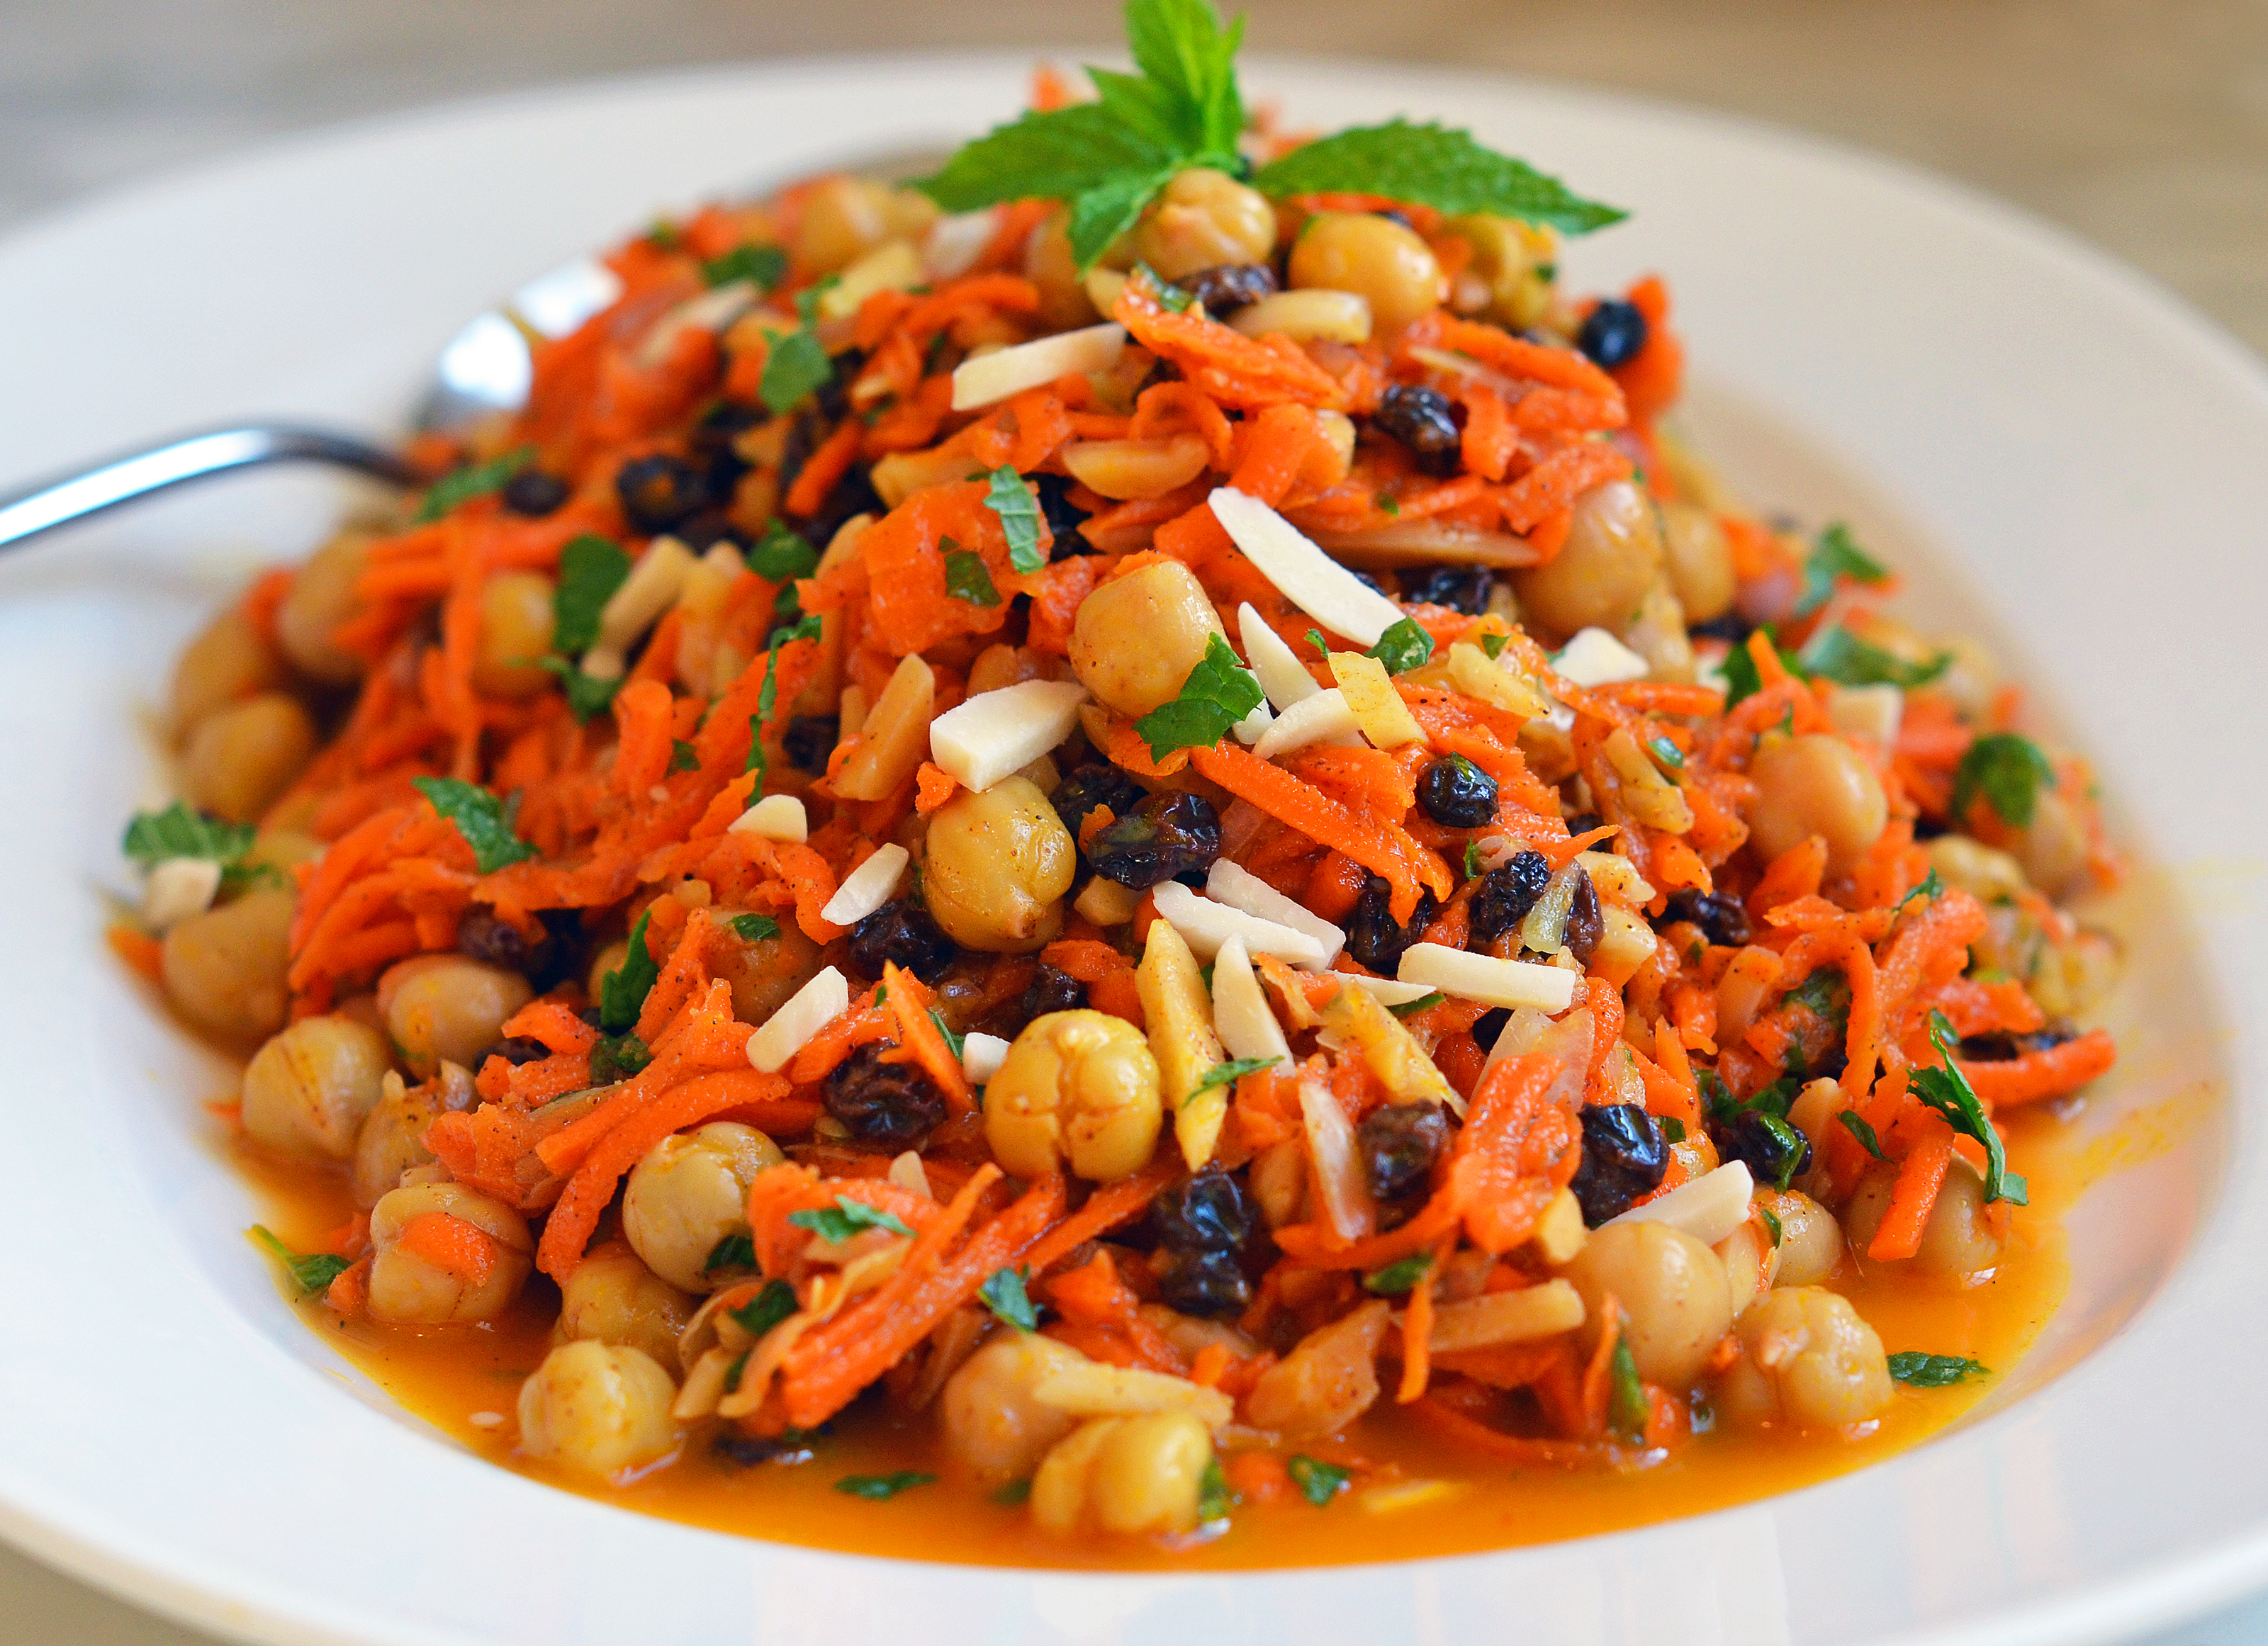 https://www.onceuponachef.com/images/2014/10/Moroccan-Carrot-Chickpea-Salad-with-Citrus-Almonds-and-Mint-3.jpg